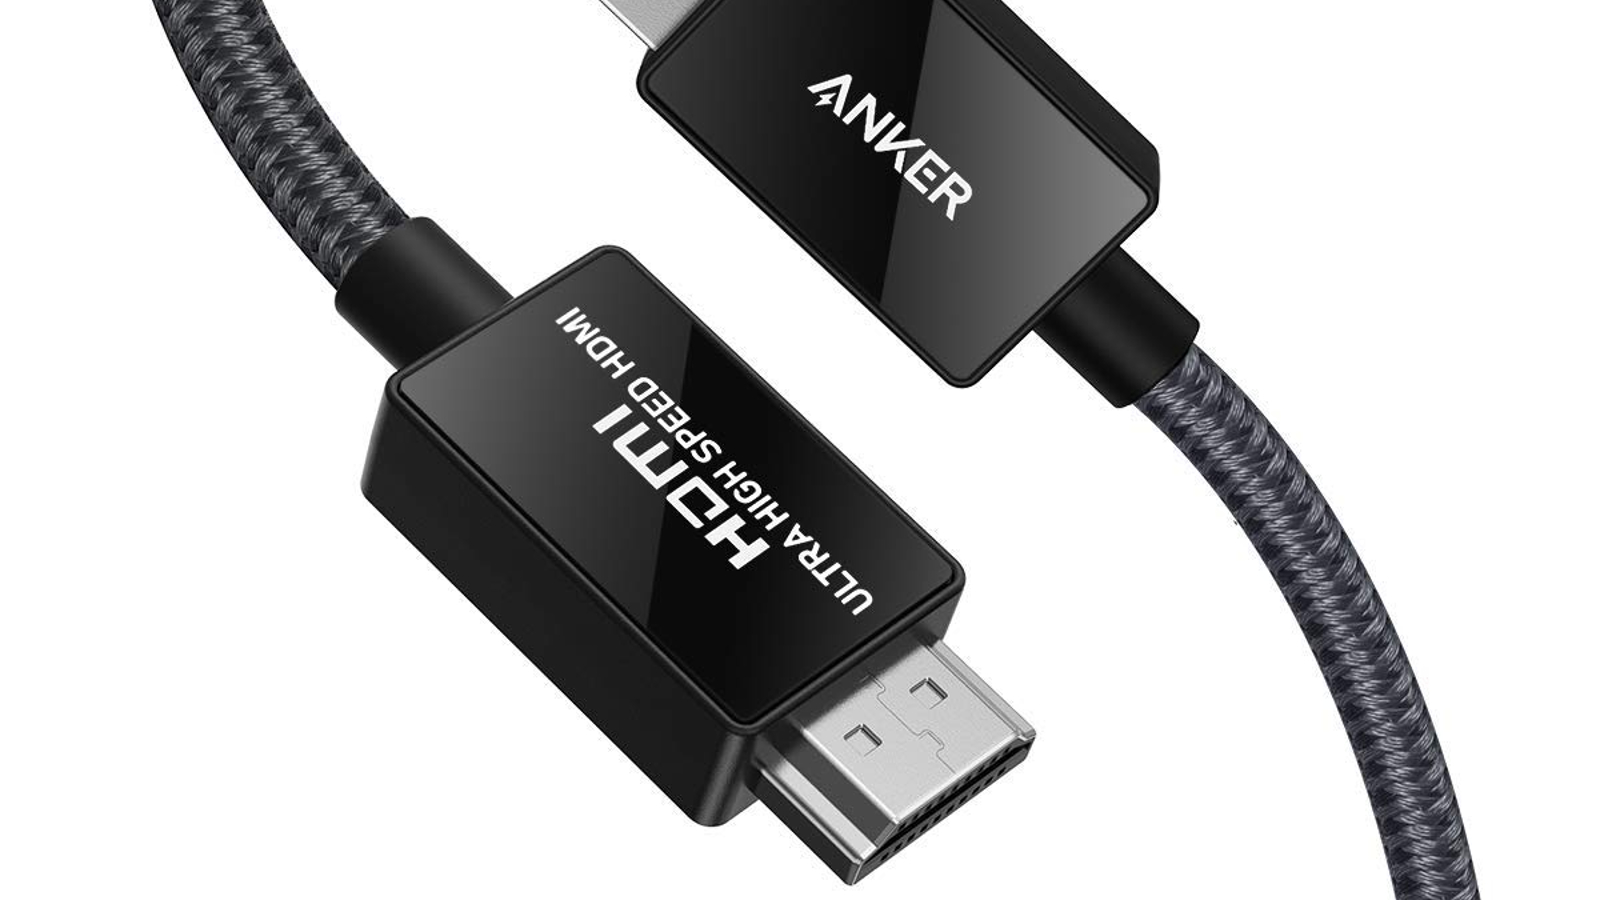 Anker 8K HDMI Cable - Best HDMI cable for speed